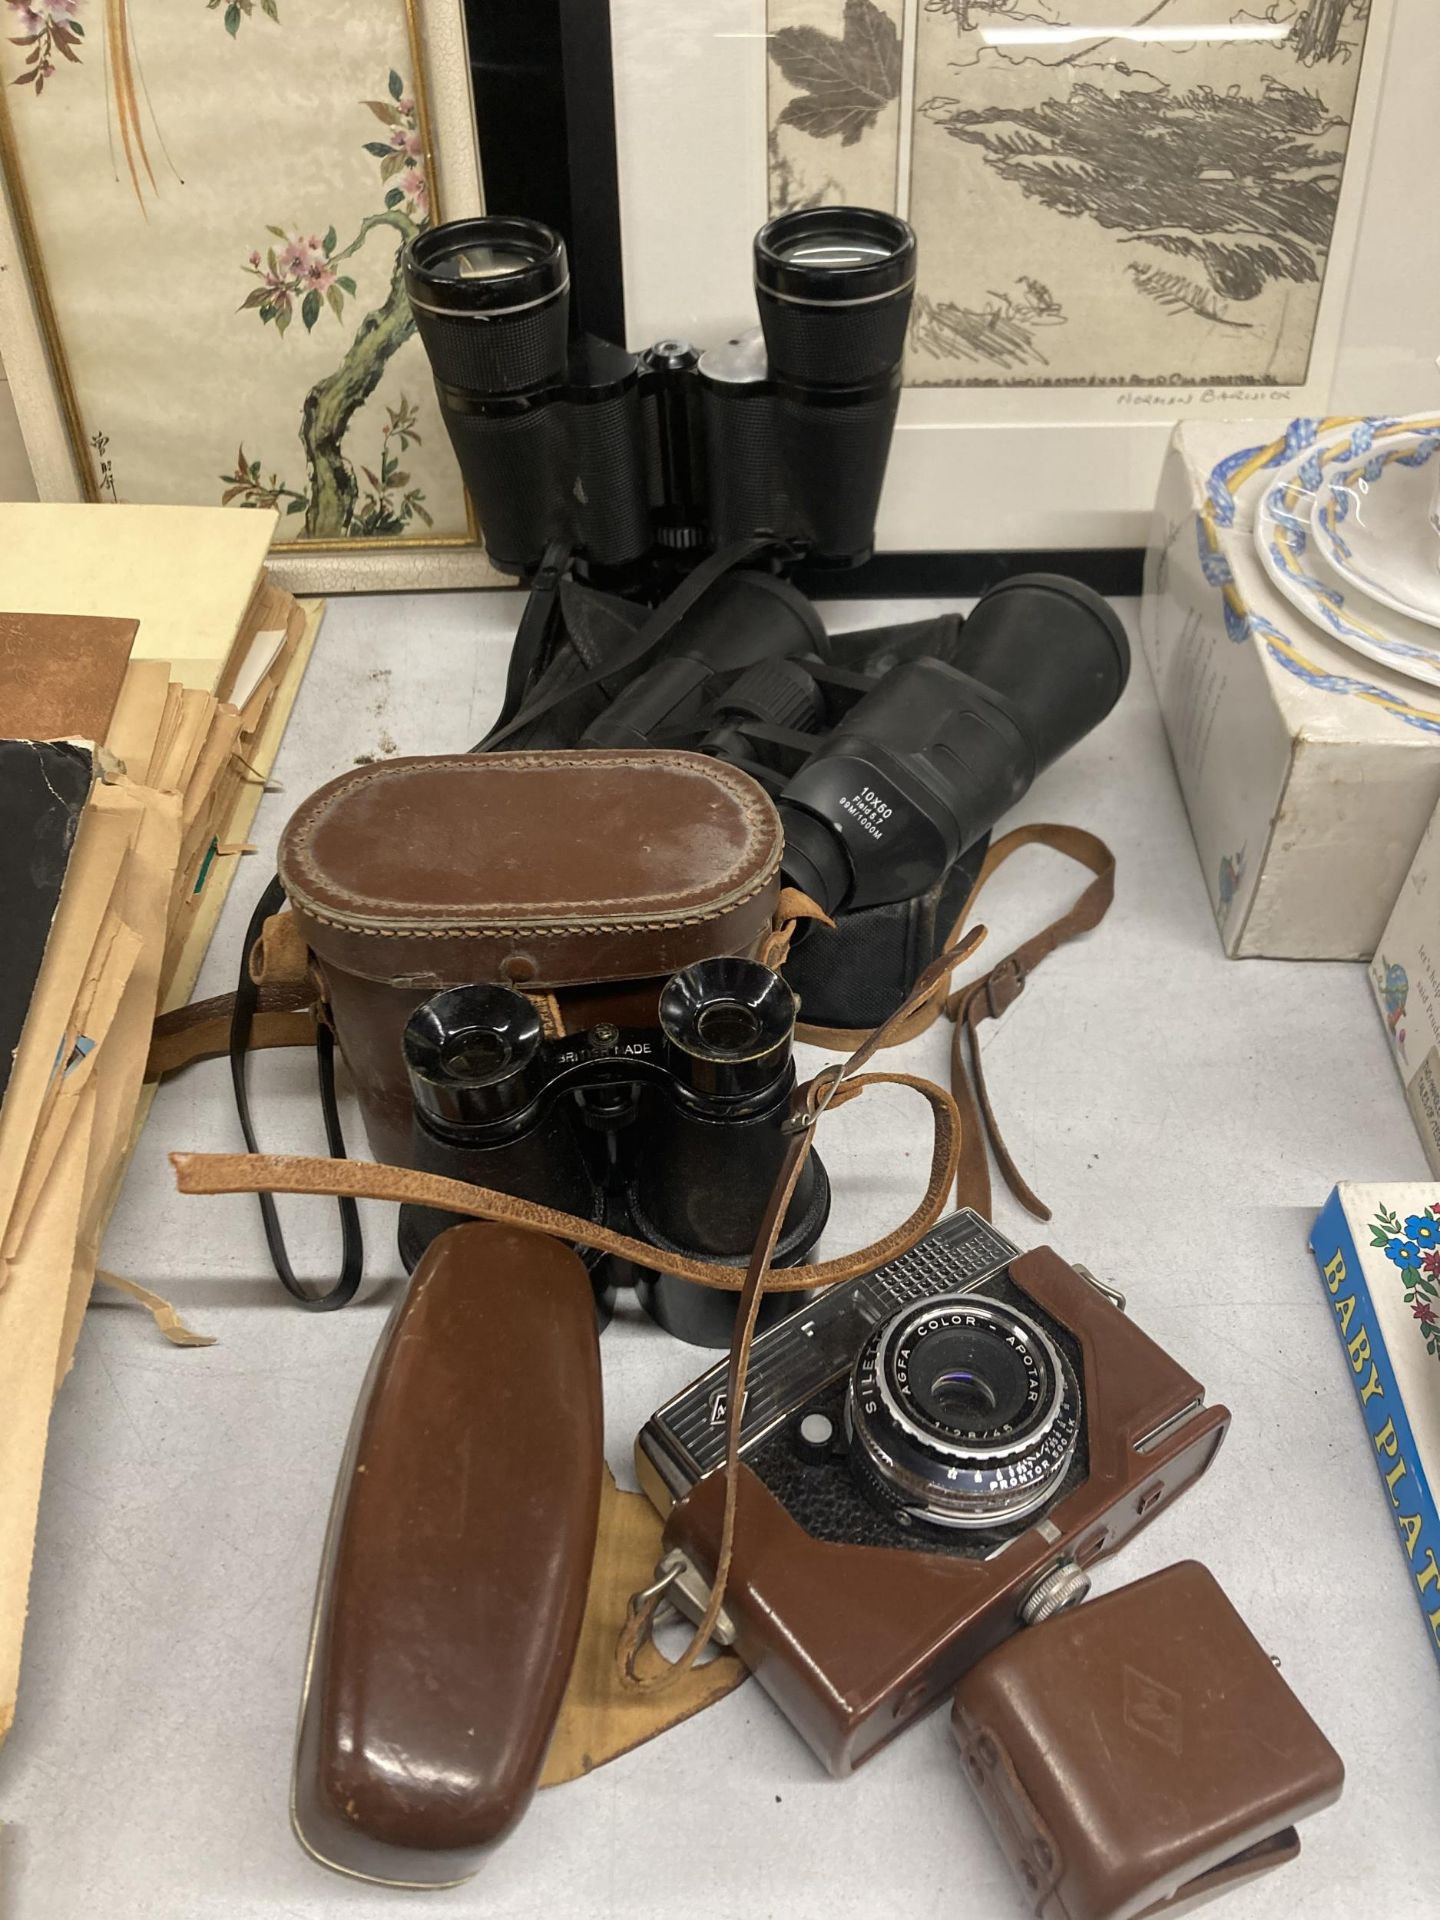 A THREE PAIRS OF BINOCULARS MADE IN BRITAIN AND HONG KONG PLUS A VINTAGE AGFA SILEETE CAMERA